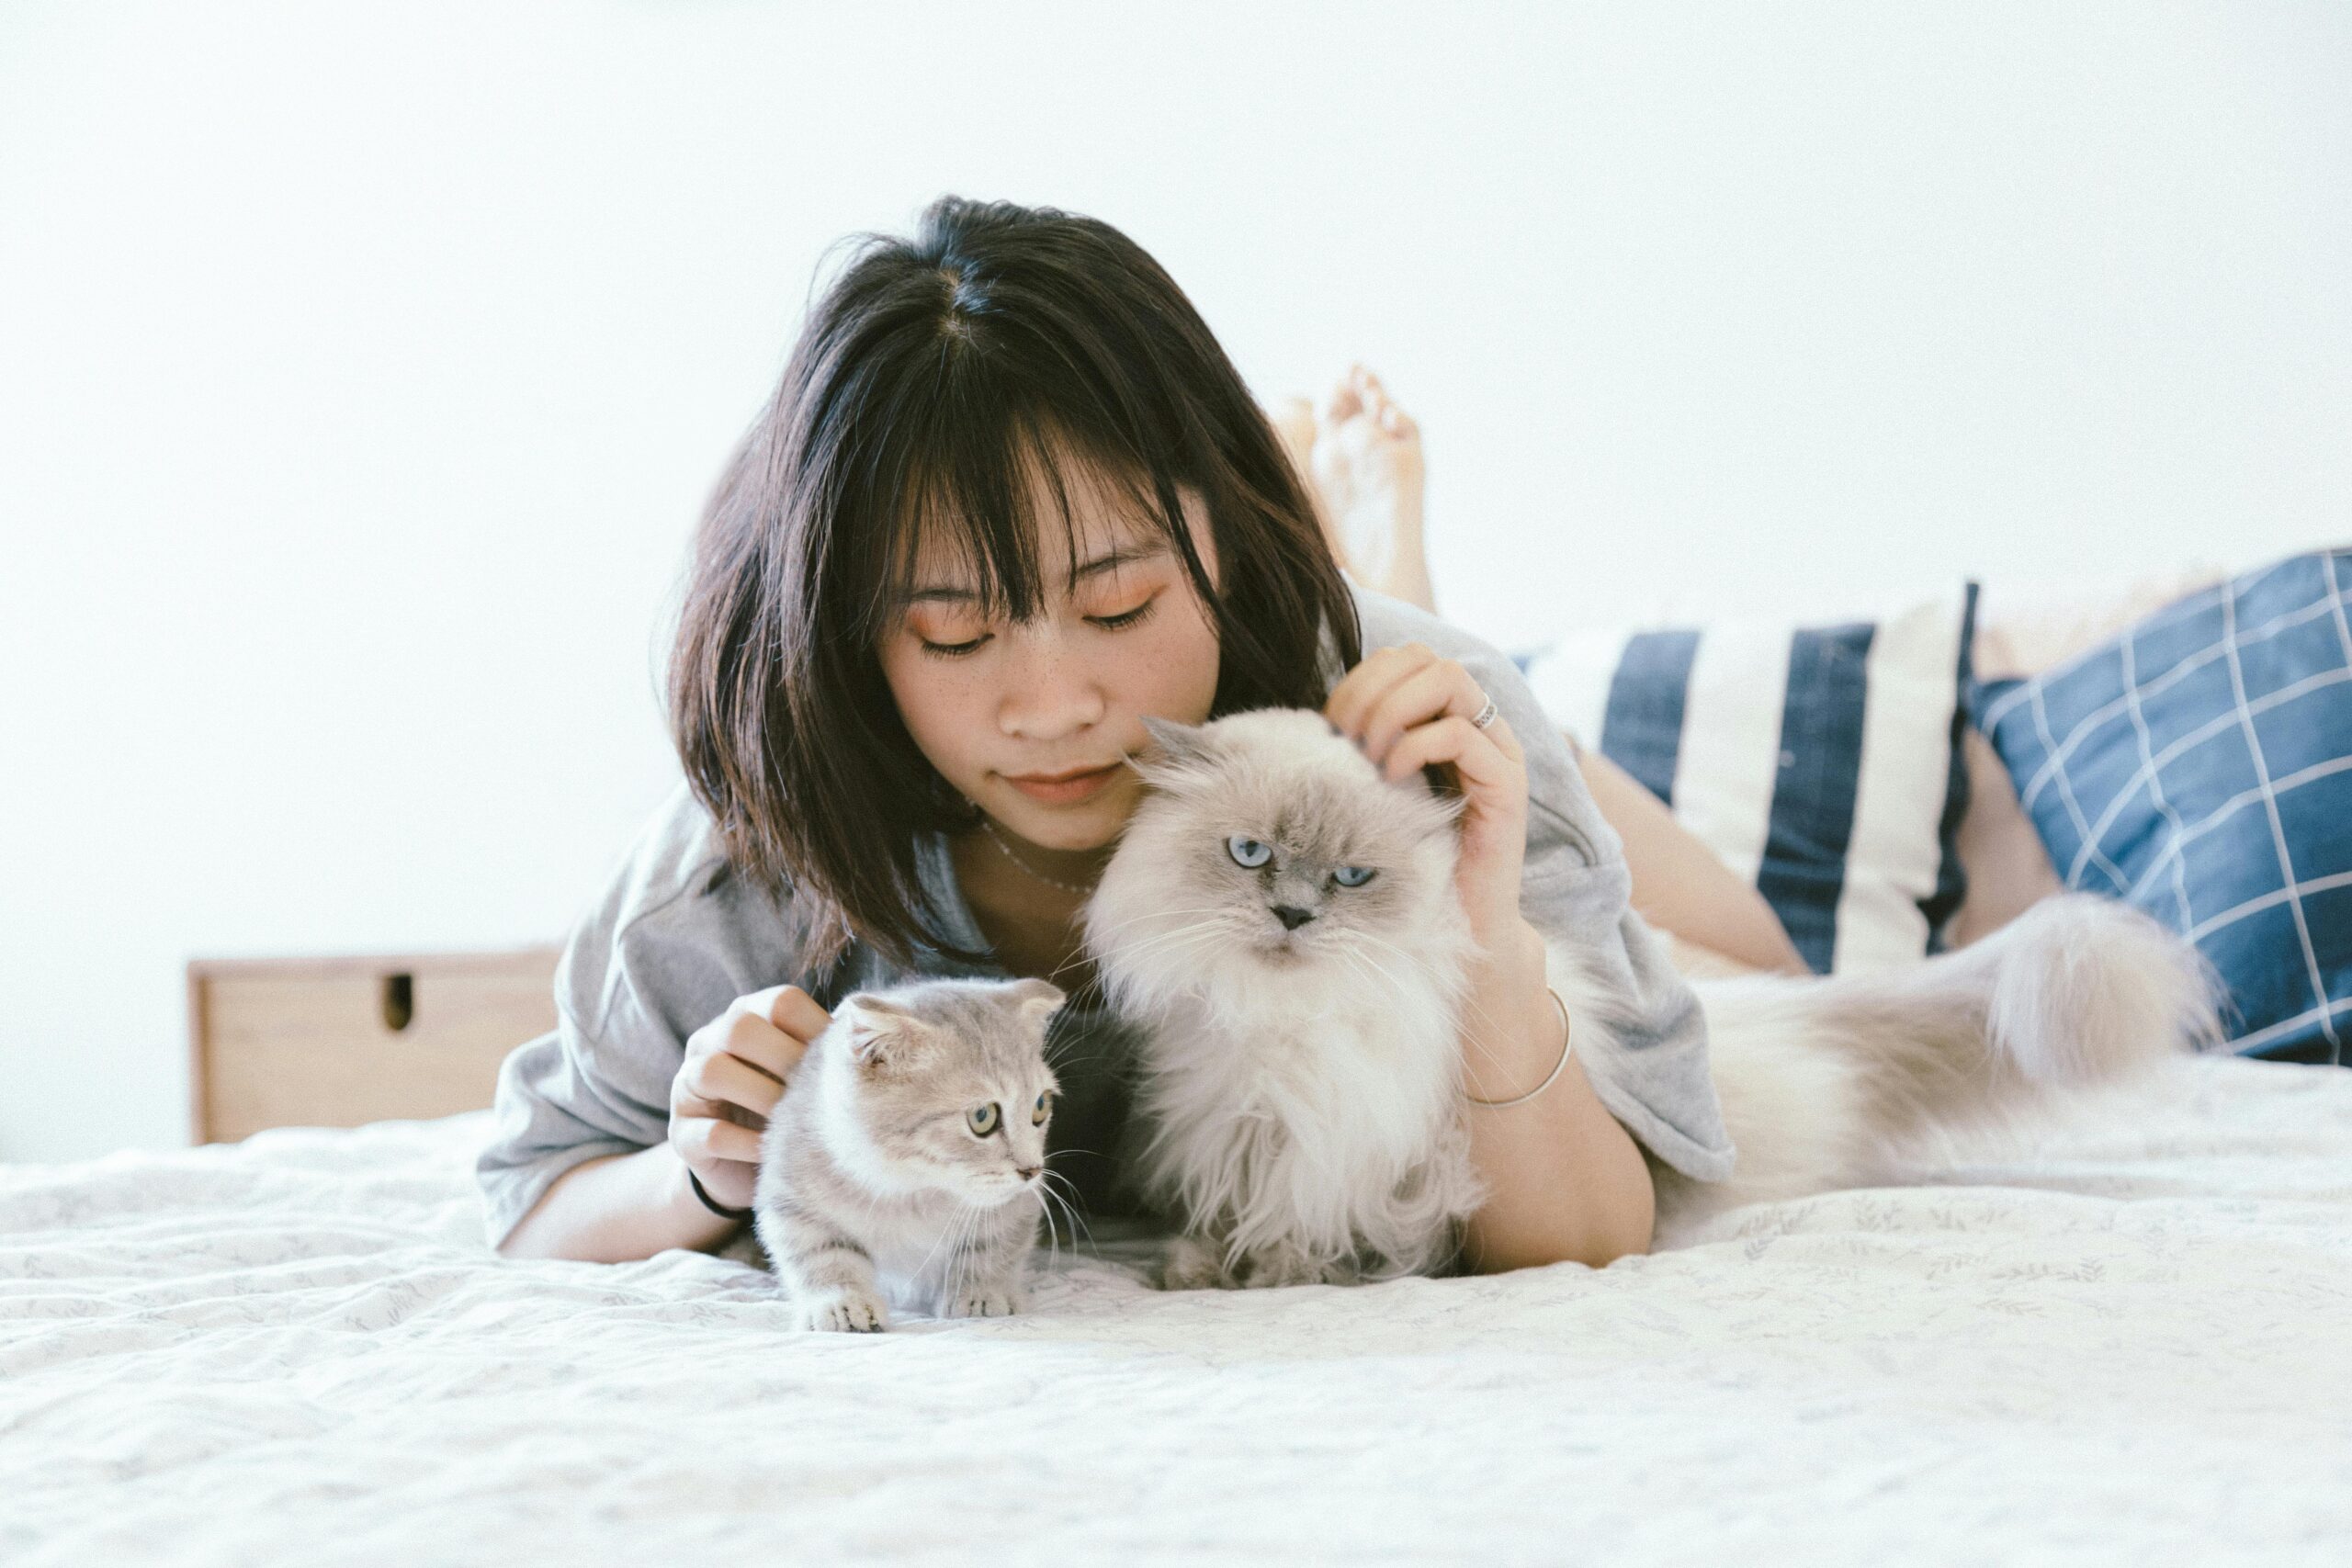 Health-conscious girl enjoying playful moments with her cat, promoting physical and emotional well-being through pet interaction.